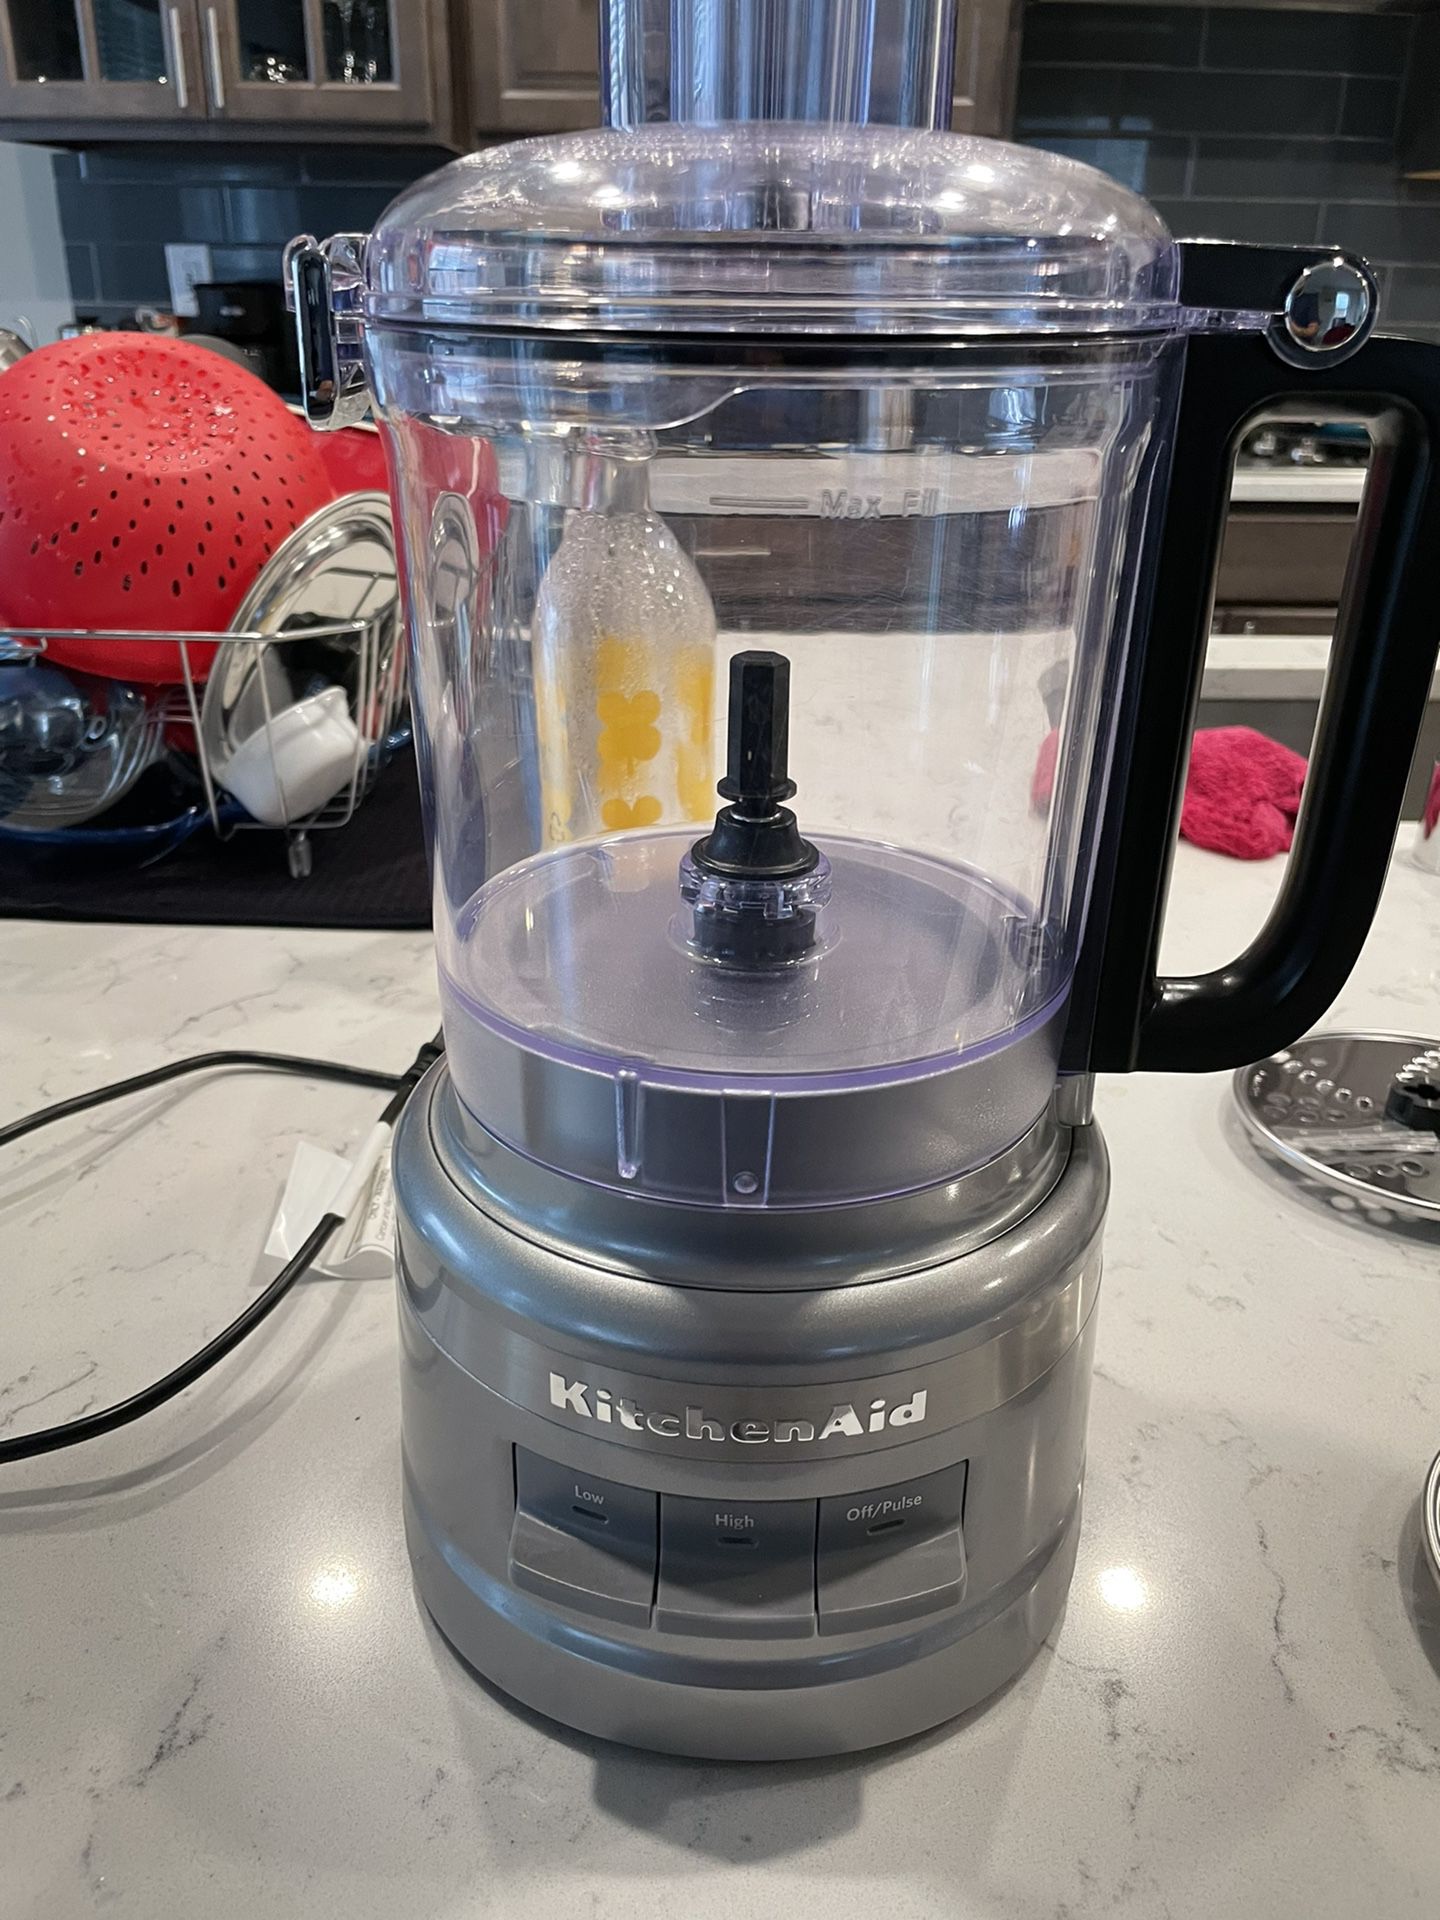 KitchenAid 7 Cup Food Processor (Silver) for Sale in Tacoma, WA - OfferUp